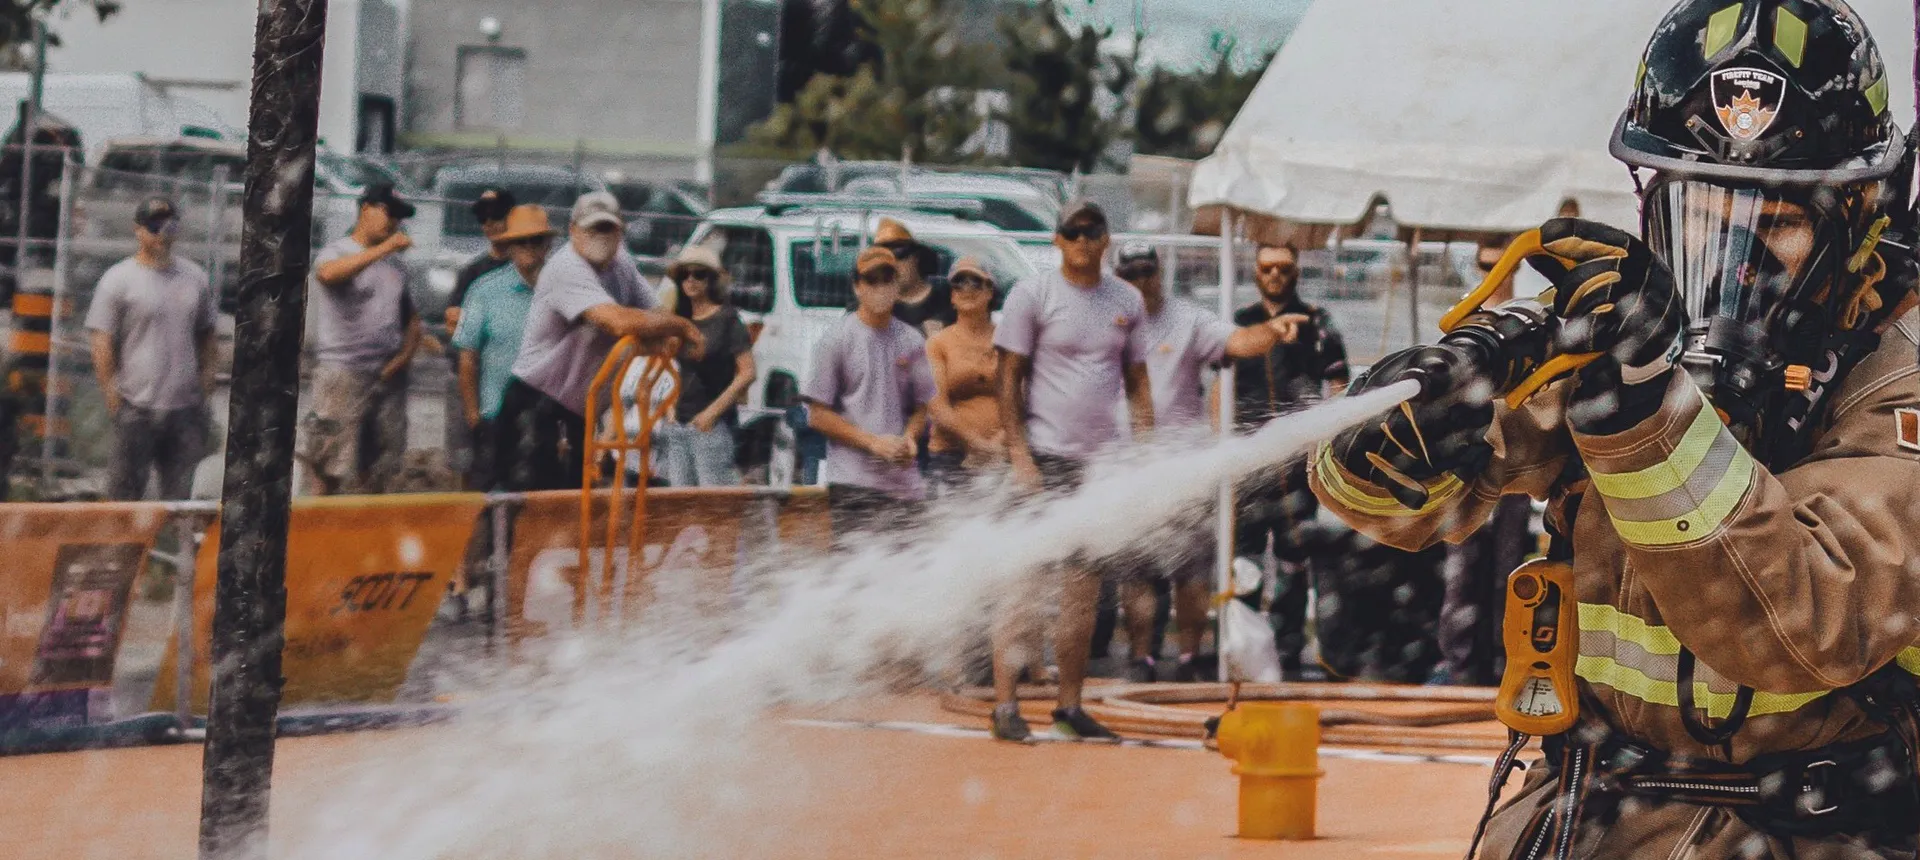 Firefighter spraying a water hose in a FireFit competition